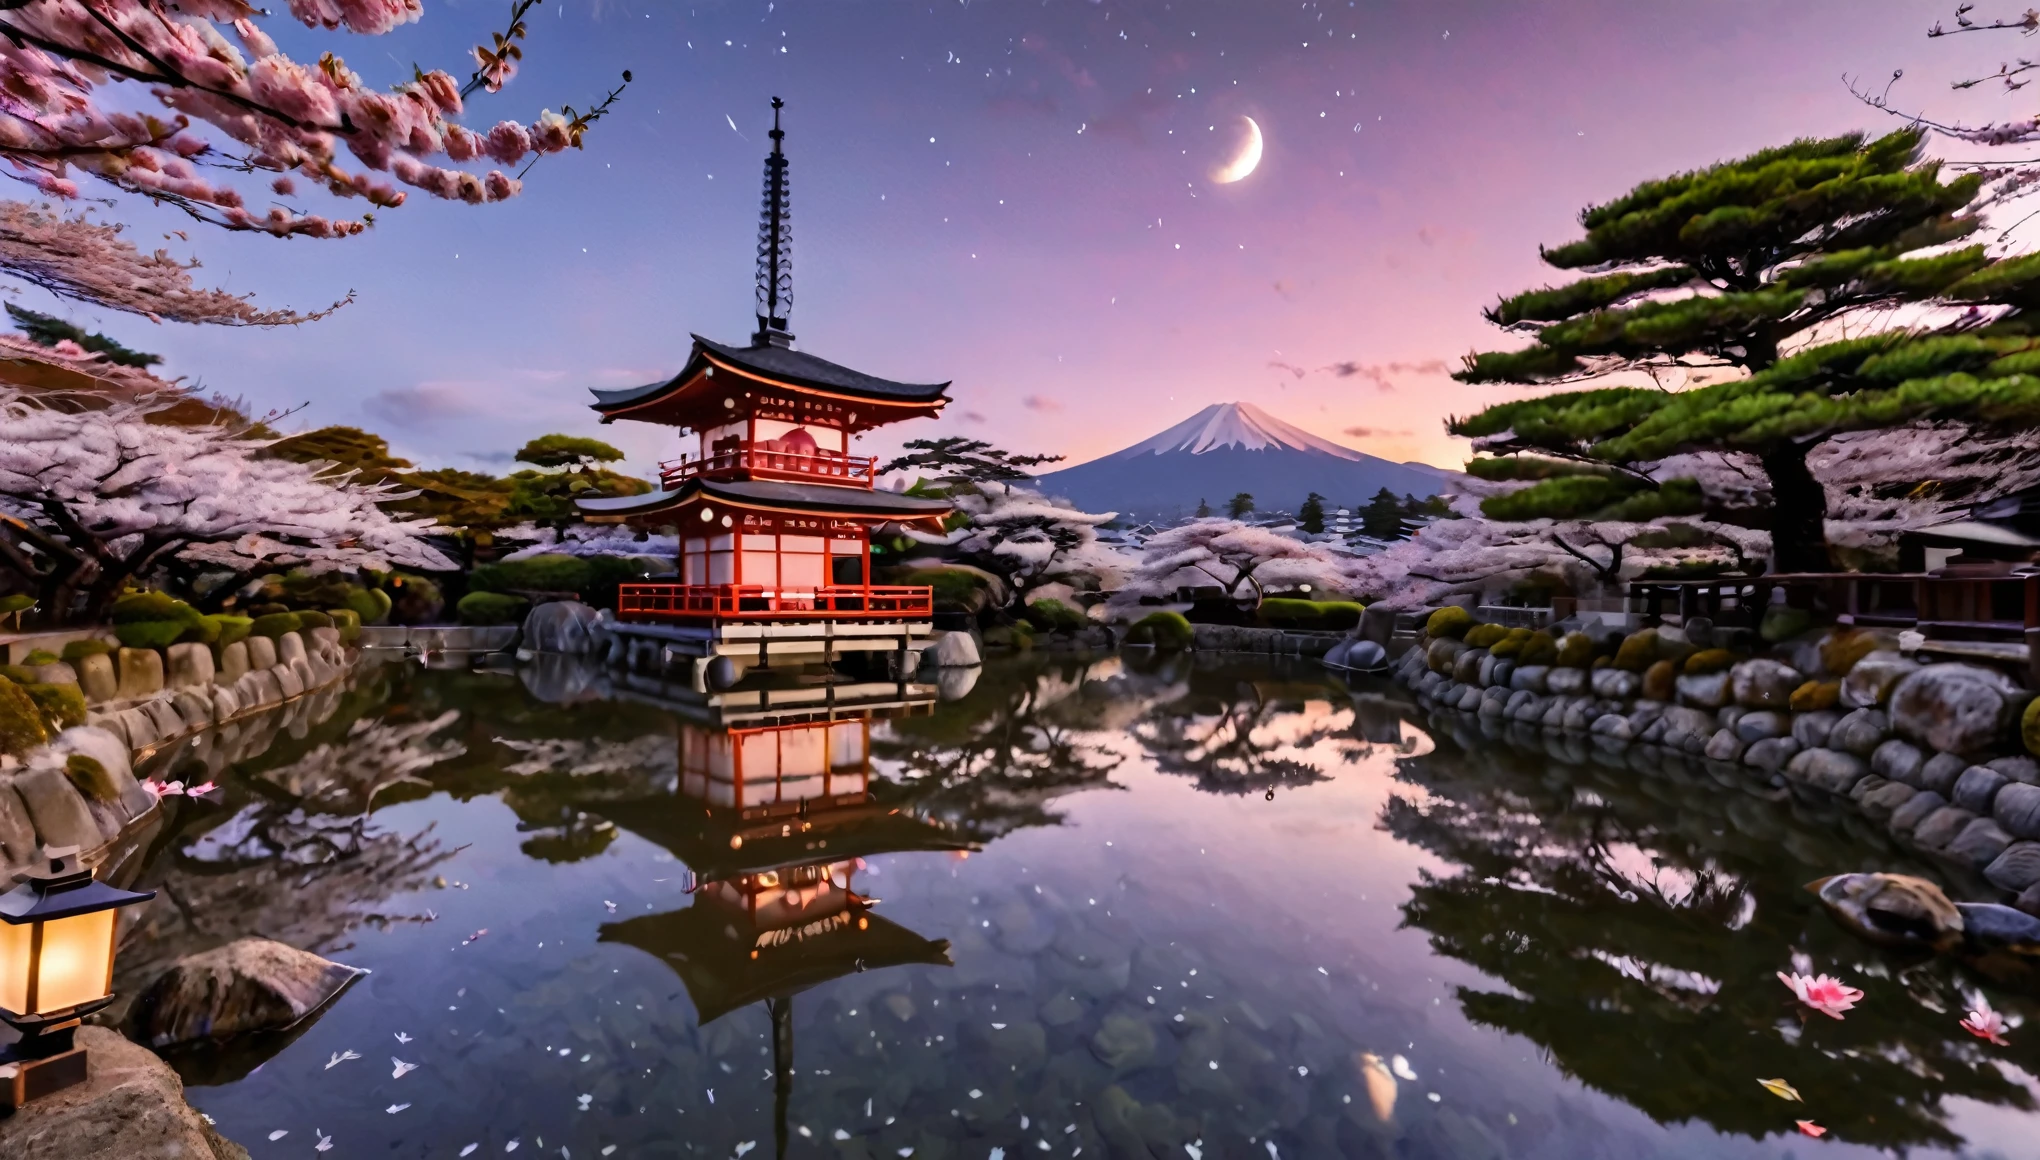 A beautiful Japanese sky at night, where the stars and moon cast a serene glow over a tranquil landscape. Traditional Japanese elements such as cherry blossoms, pagodas, and koi ponds are subtly integrated, reflecting in the water's surface. The sky is a tapestry of deep indigos and purples, with hints of pink from the setting sun. Lanterns float gently, adding a warm, inviting light. The scene is both peaceful and vibrant, capturing the essence of a magical night in Japan.